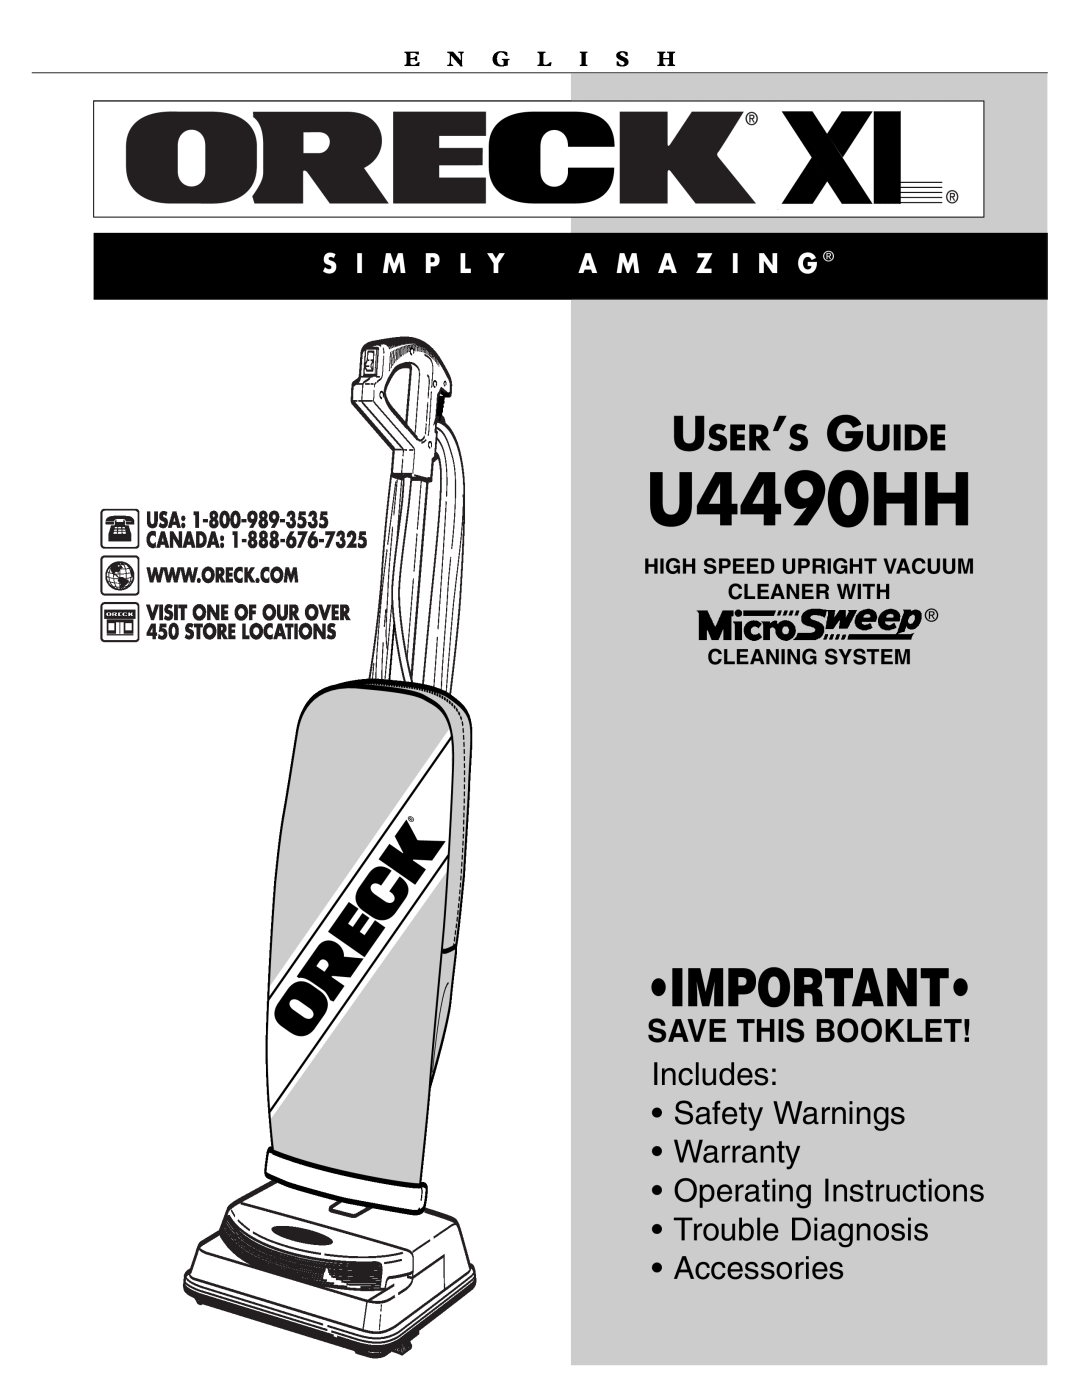 Oreck U4490HH warranty Save This Booklet, High Speed Upright Vacuum Cleaner With, Cleaning System, User’S Guide 